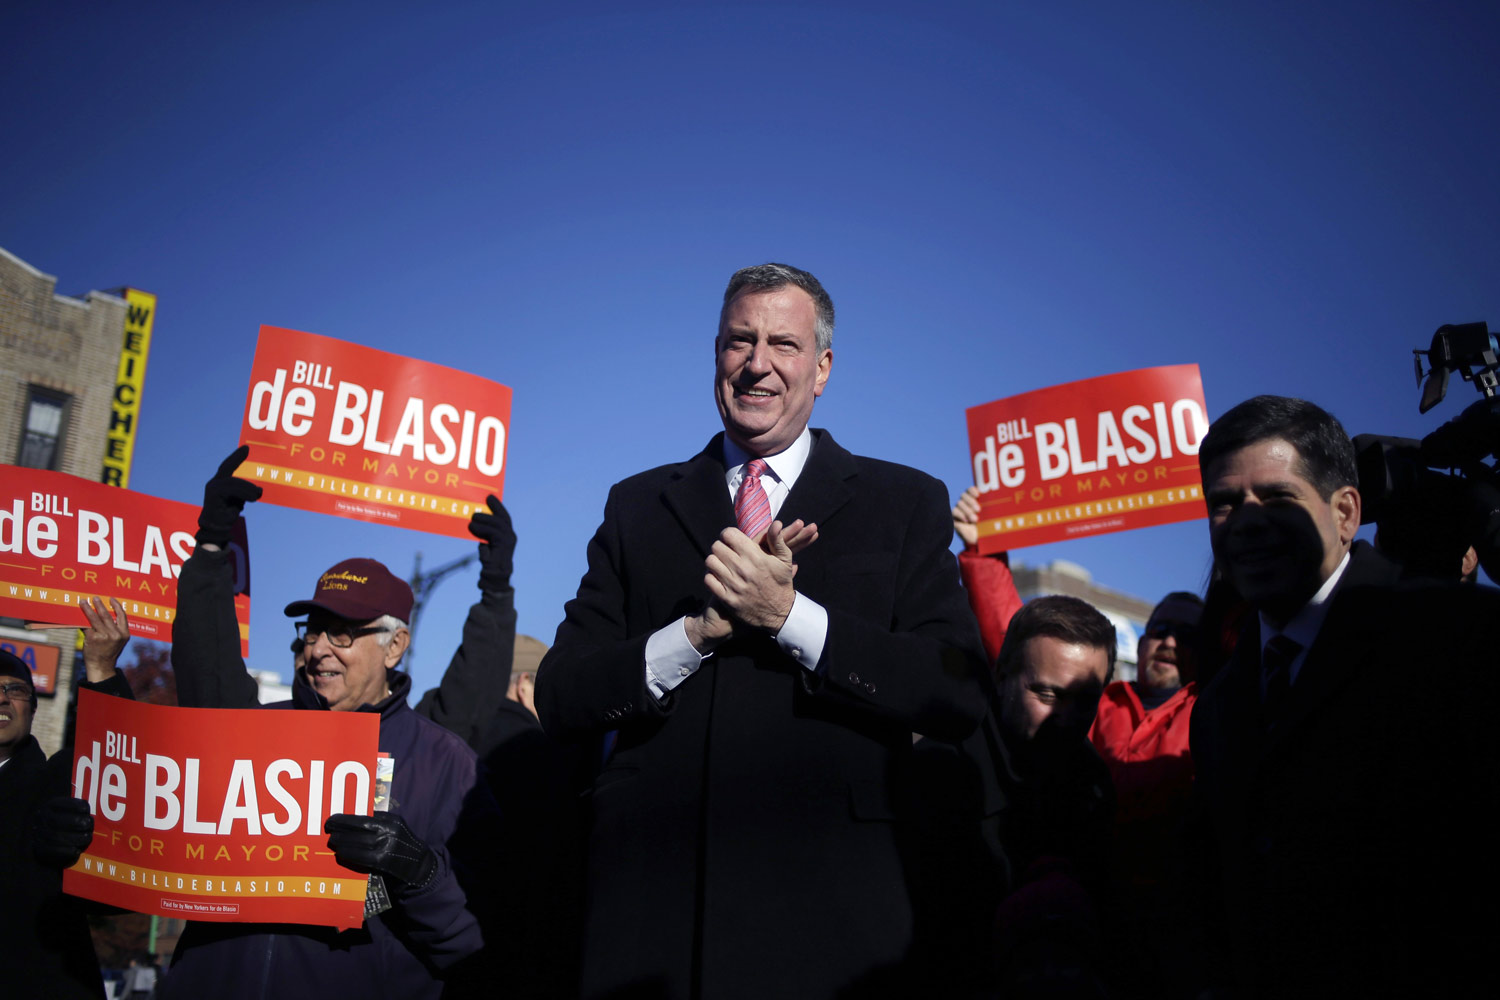 Allies and Skeptics Alike Want Details From de Blasio